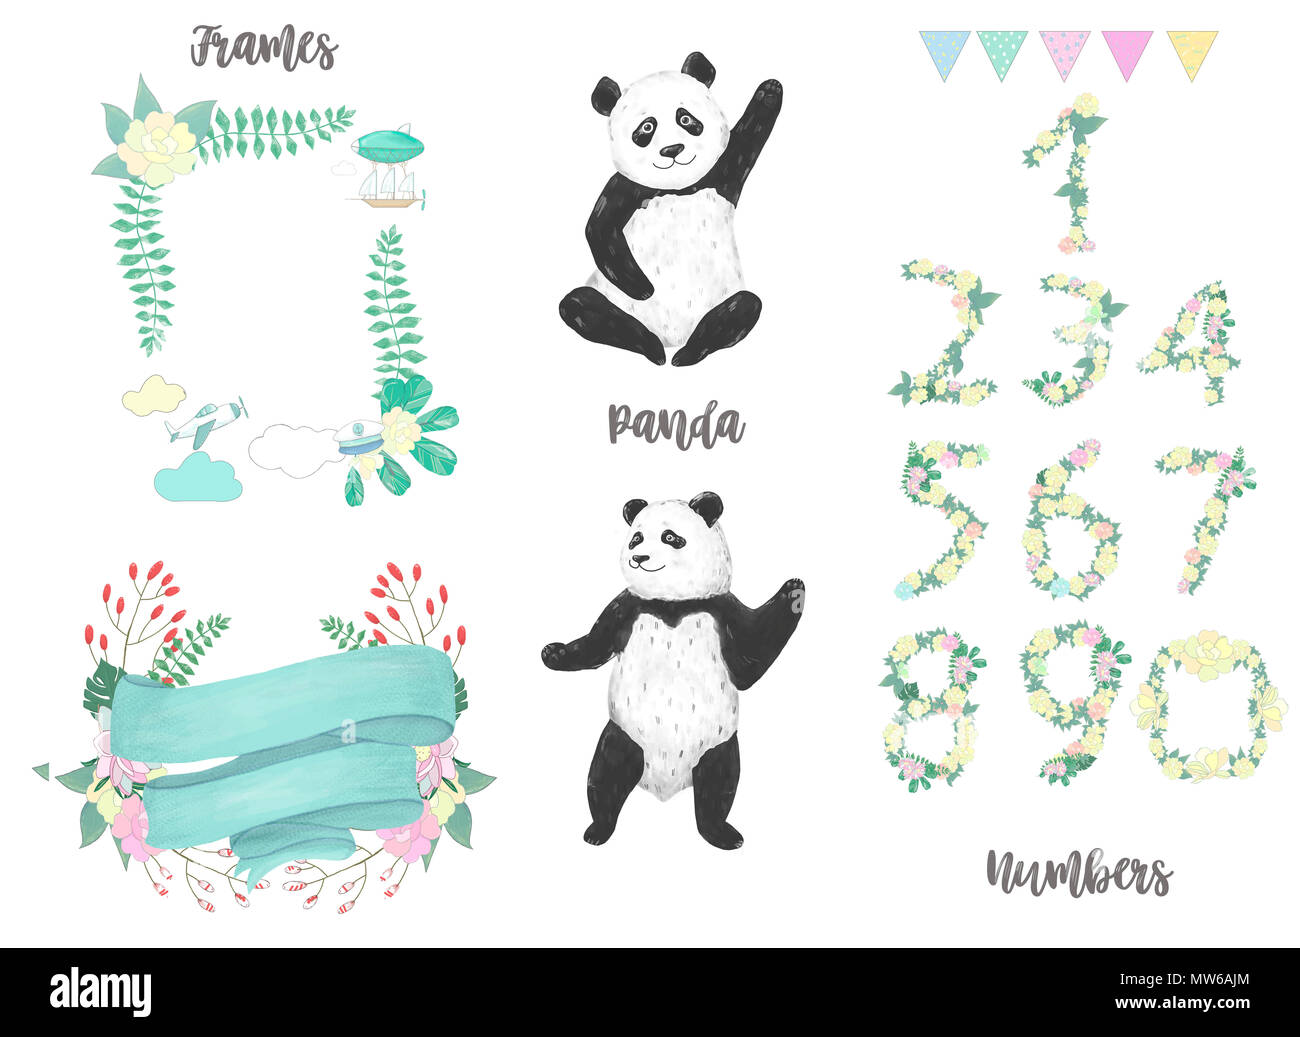 Panda clip art drawing animals for celebration birthday cards set of numbers  pandas and frames on white bakcground Stock Photo - Alamy